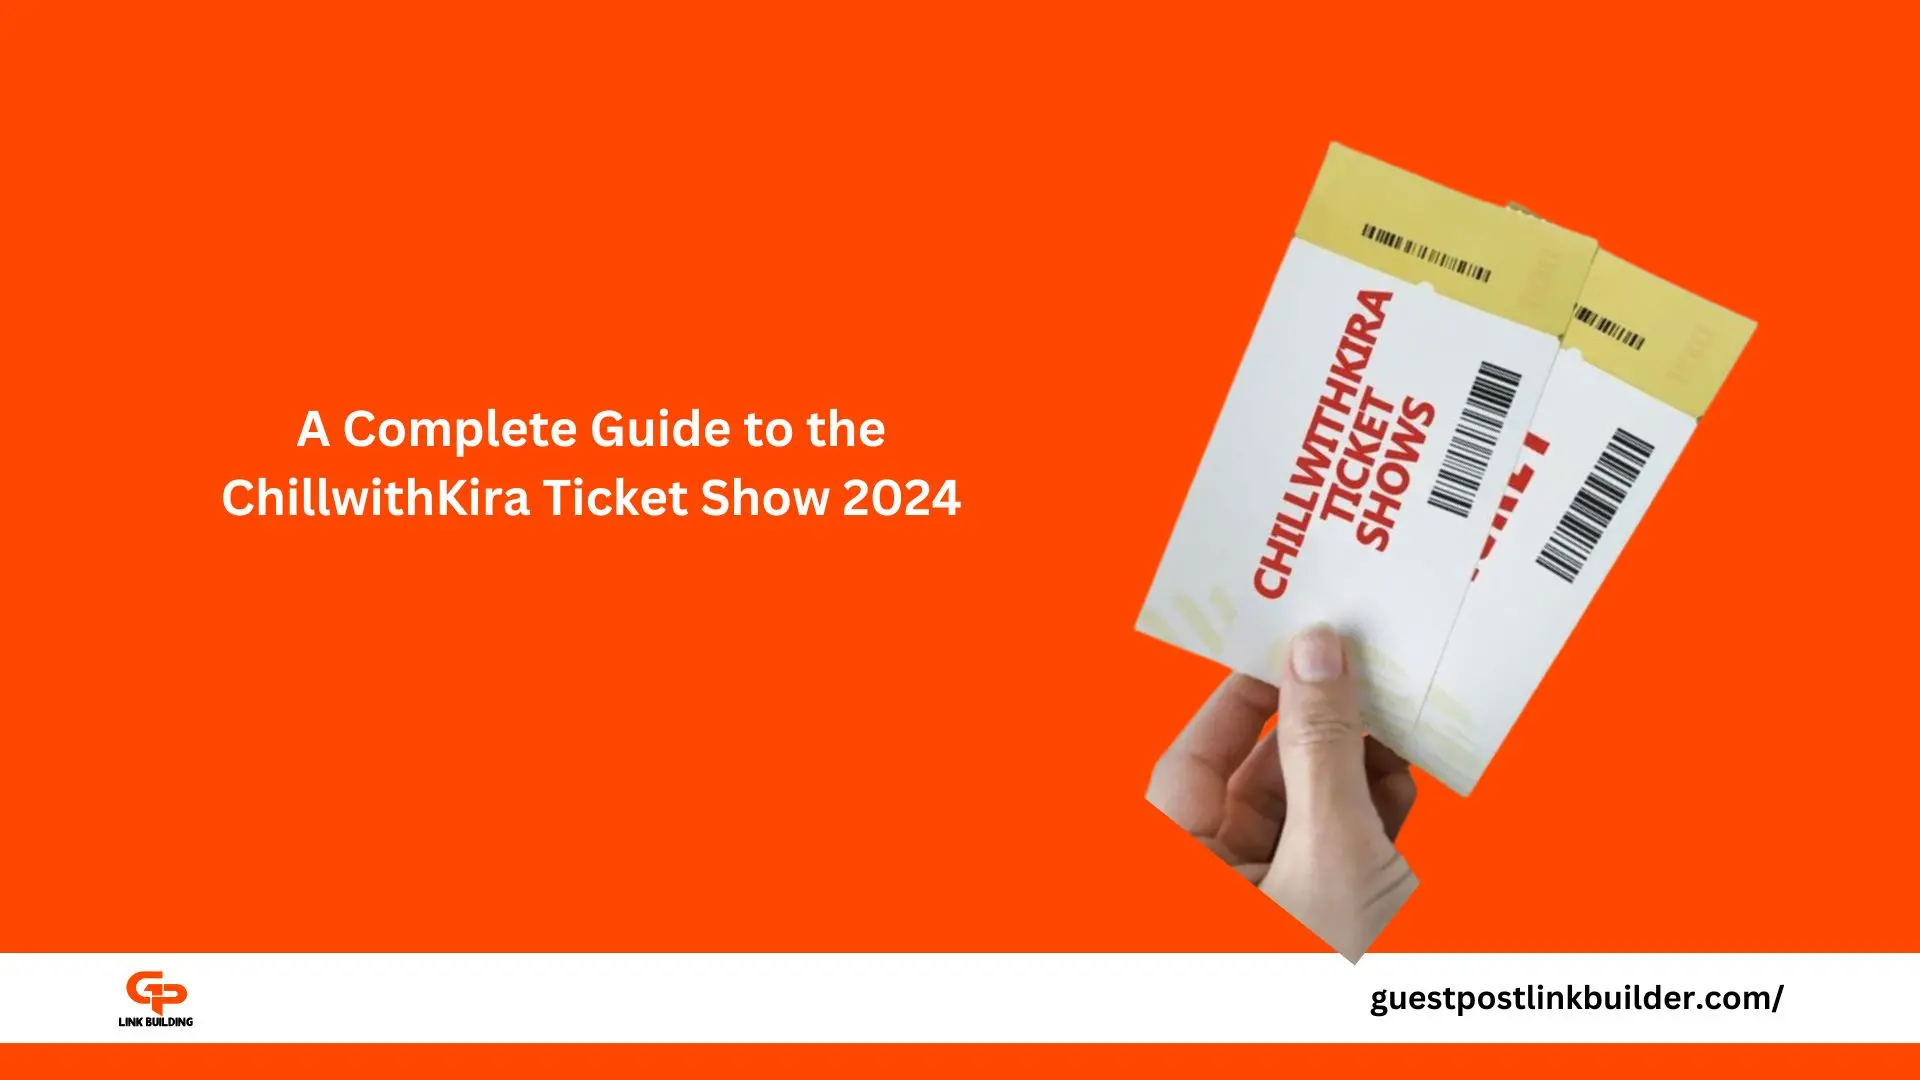 A Complete Guide to the ChillwithKira Ticket Show 2024